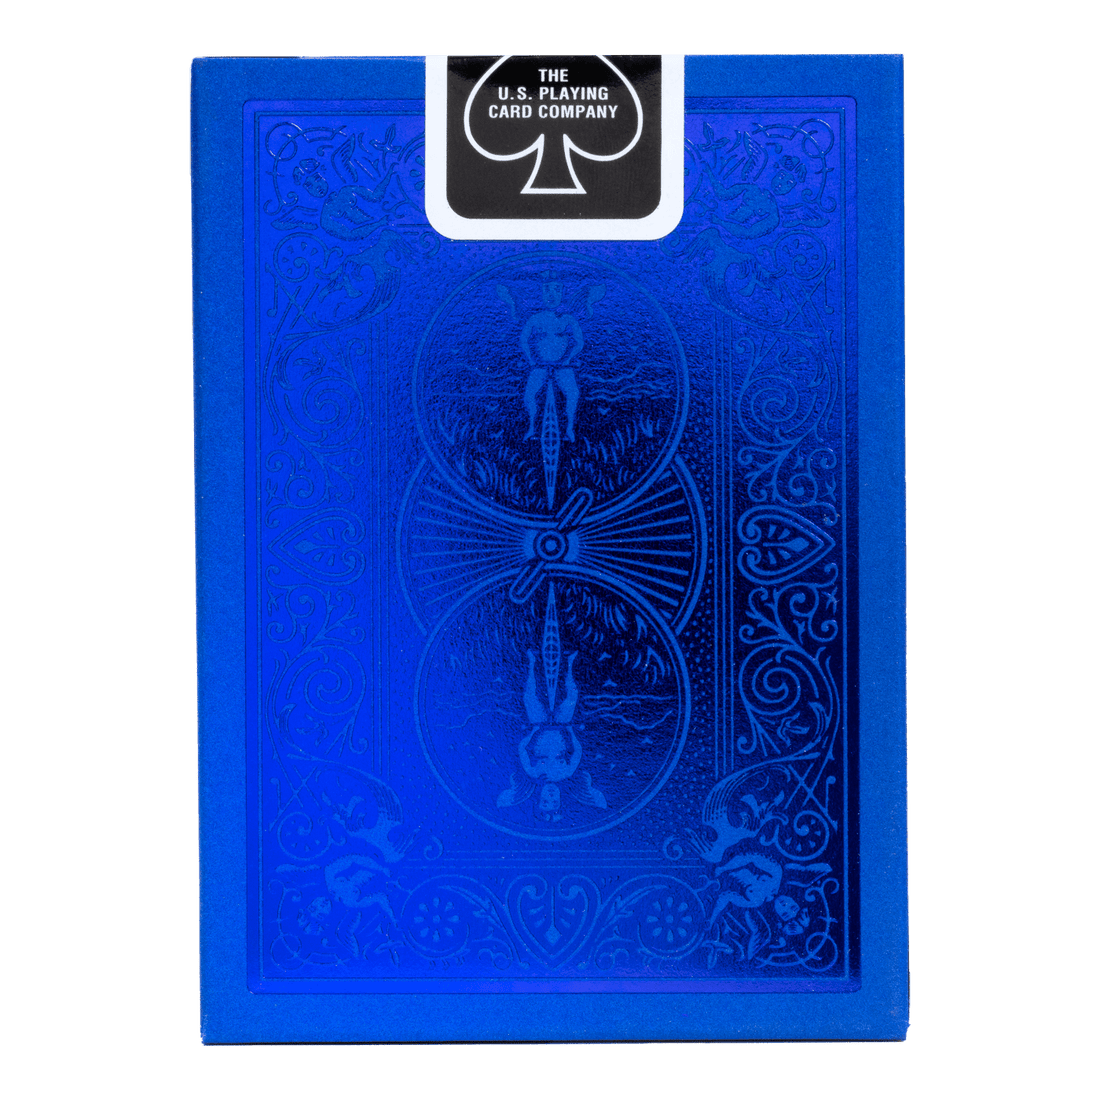 Bicycle Metalluxe Blue Playing Cards